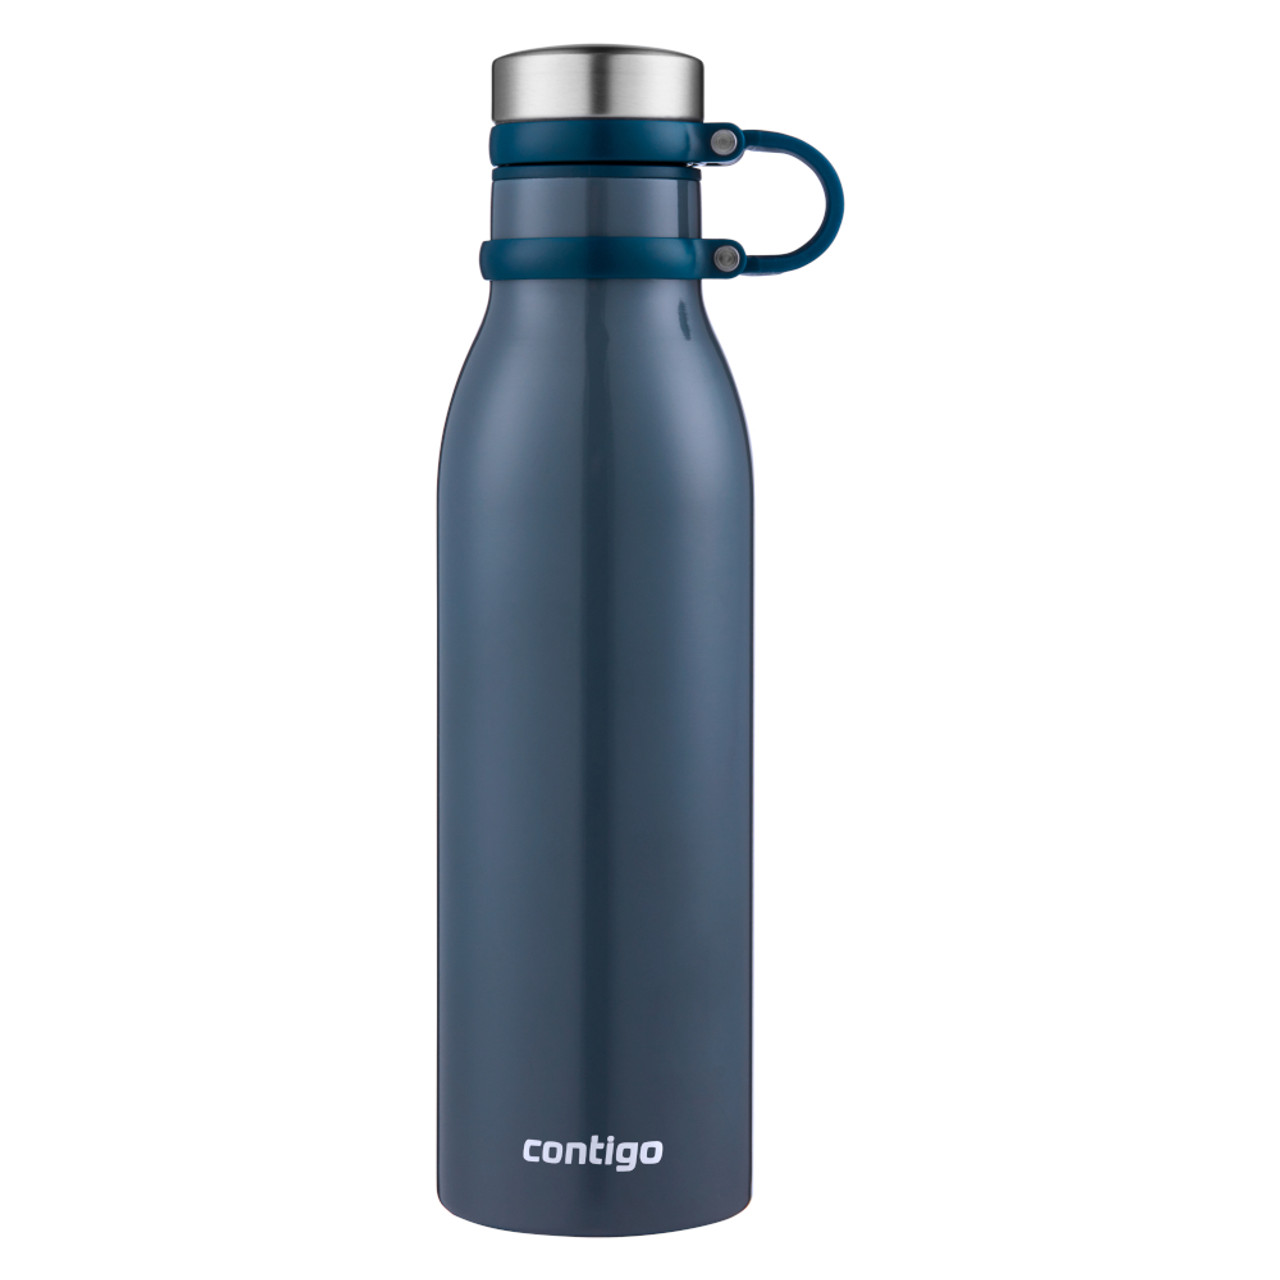 2136678 - Contigo Matterhorn Insulated Water Bottle - 590ml - Blueberry - Stylish and durable stainless-steel drinks bottle for walkers, hikers, travellers, commuters and more